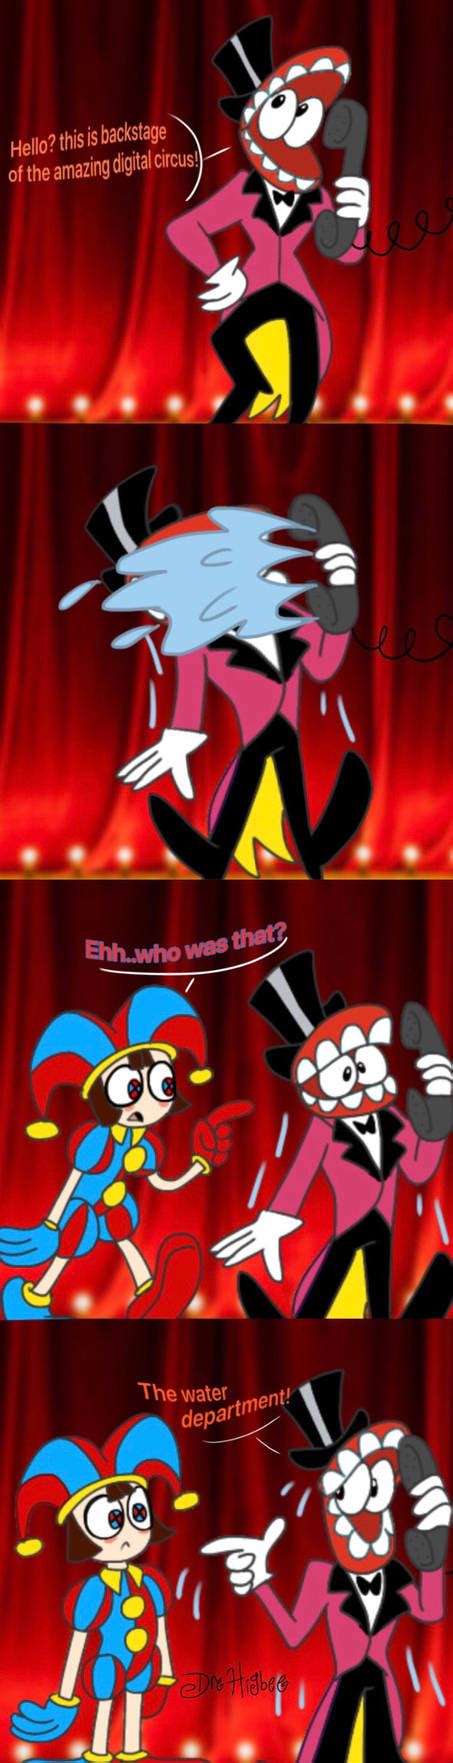 Backstage The Amazing Digital Circus By Mcdnalds2016 On Deviantart